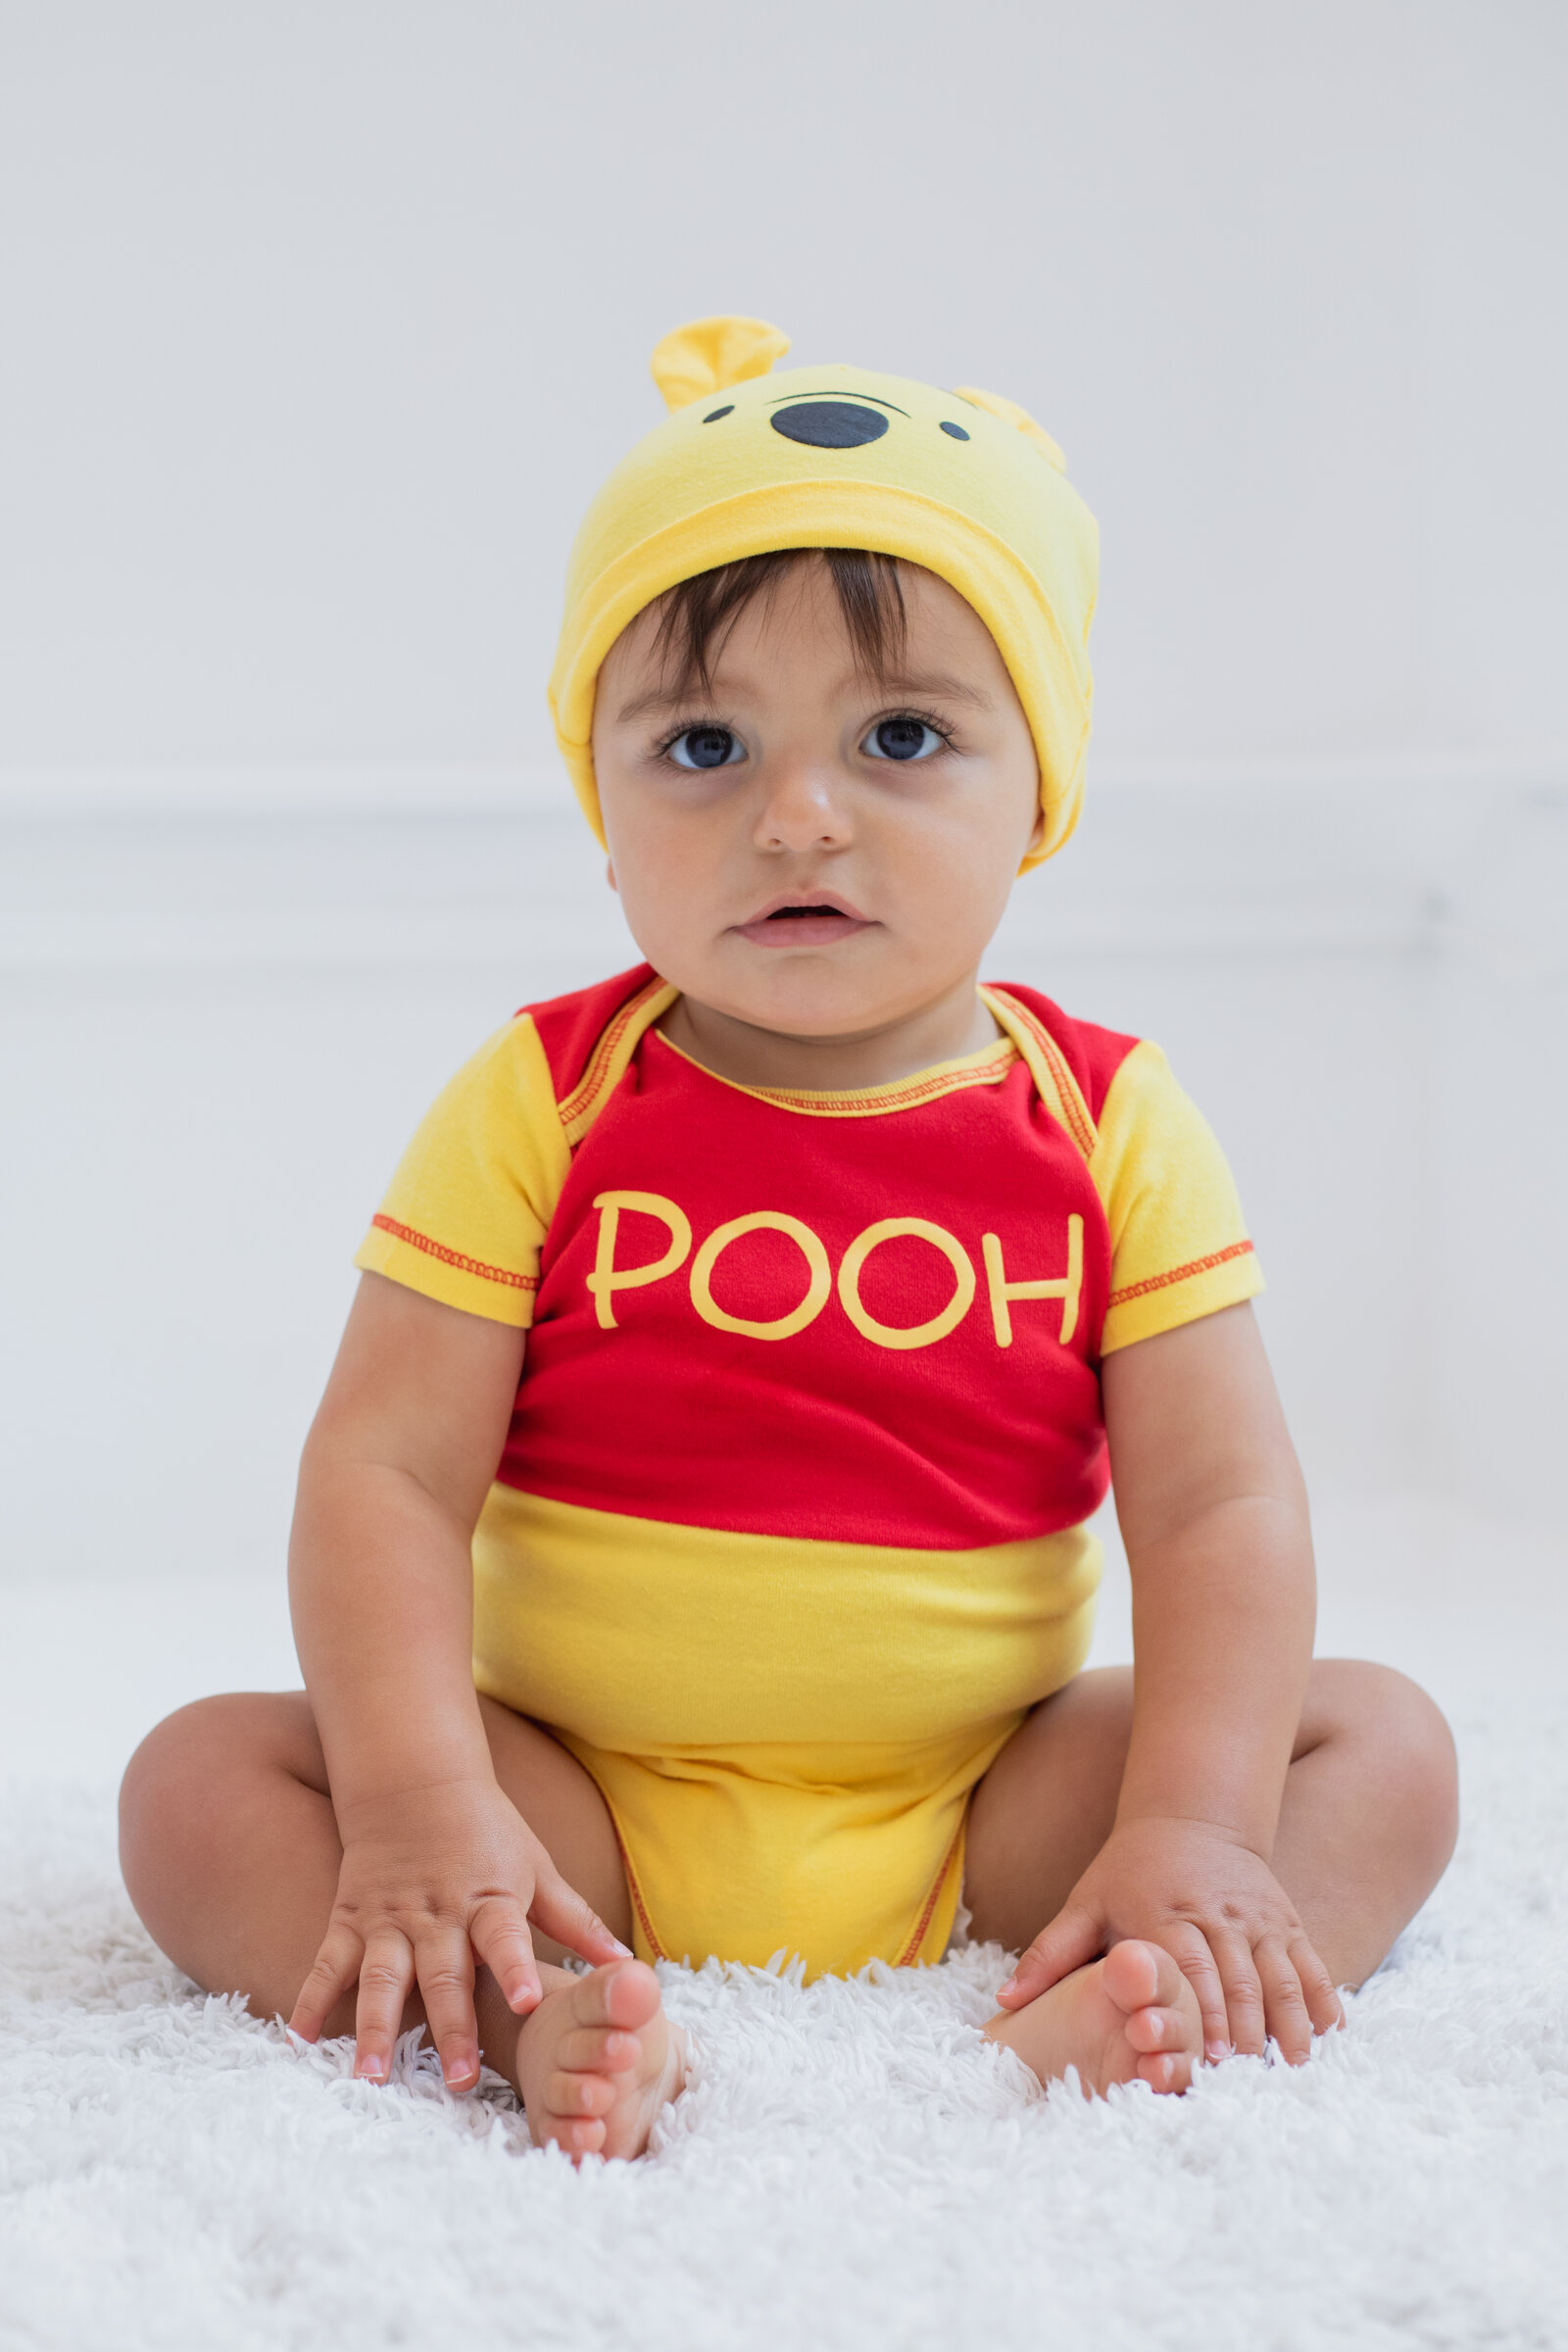 Disney Winnie the Pooh Infant Baby Boys Bodysuit and Hat Set Newborn to Infant - image 5 of 5